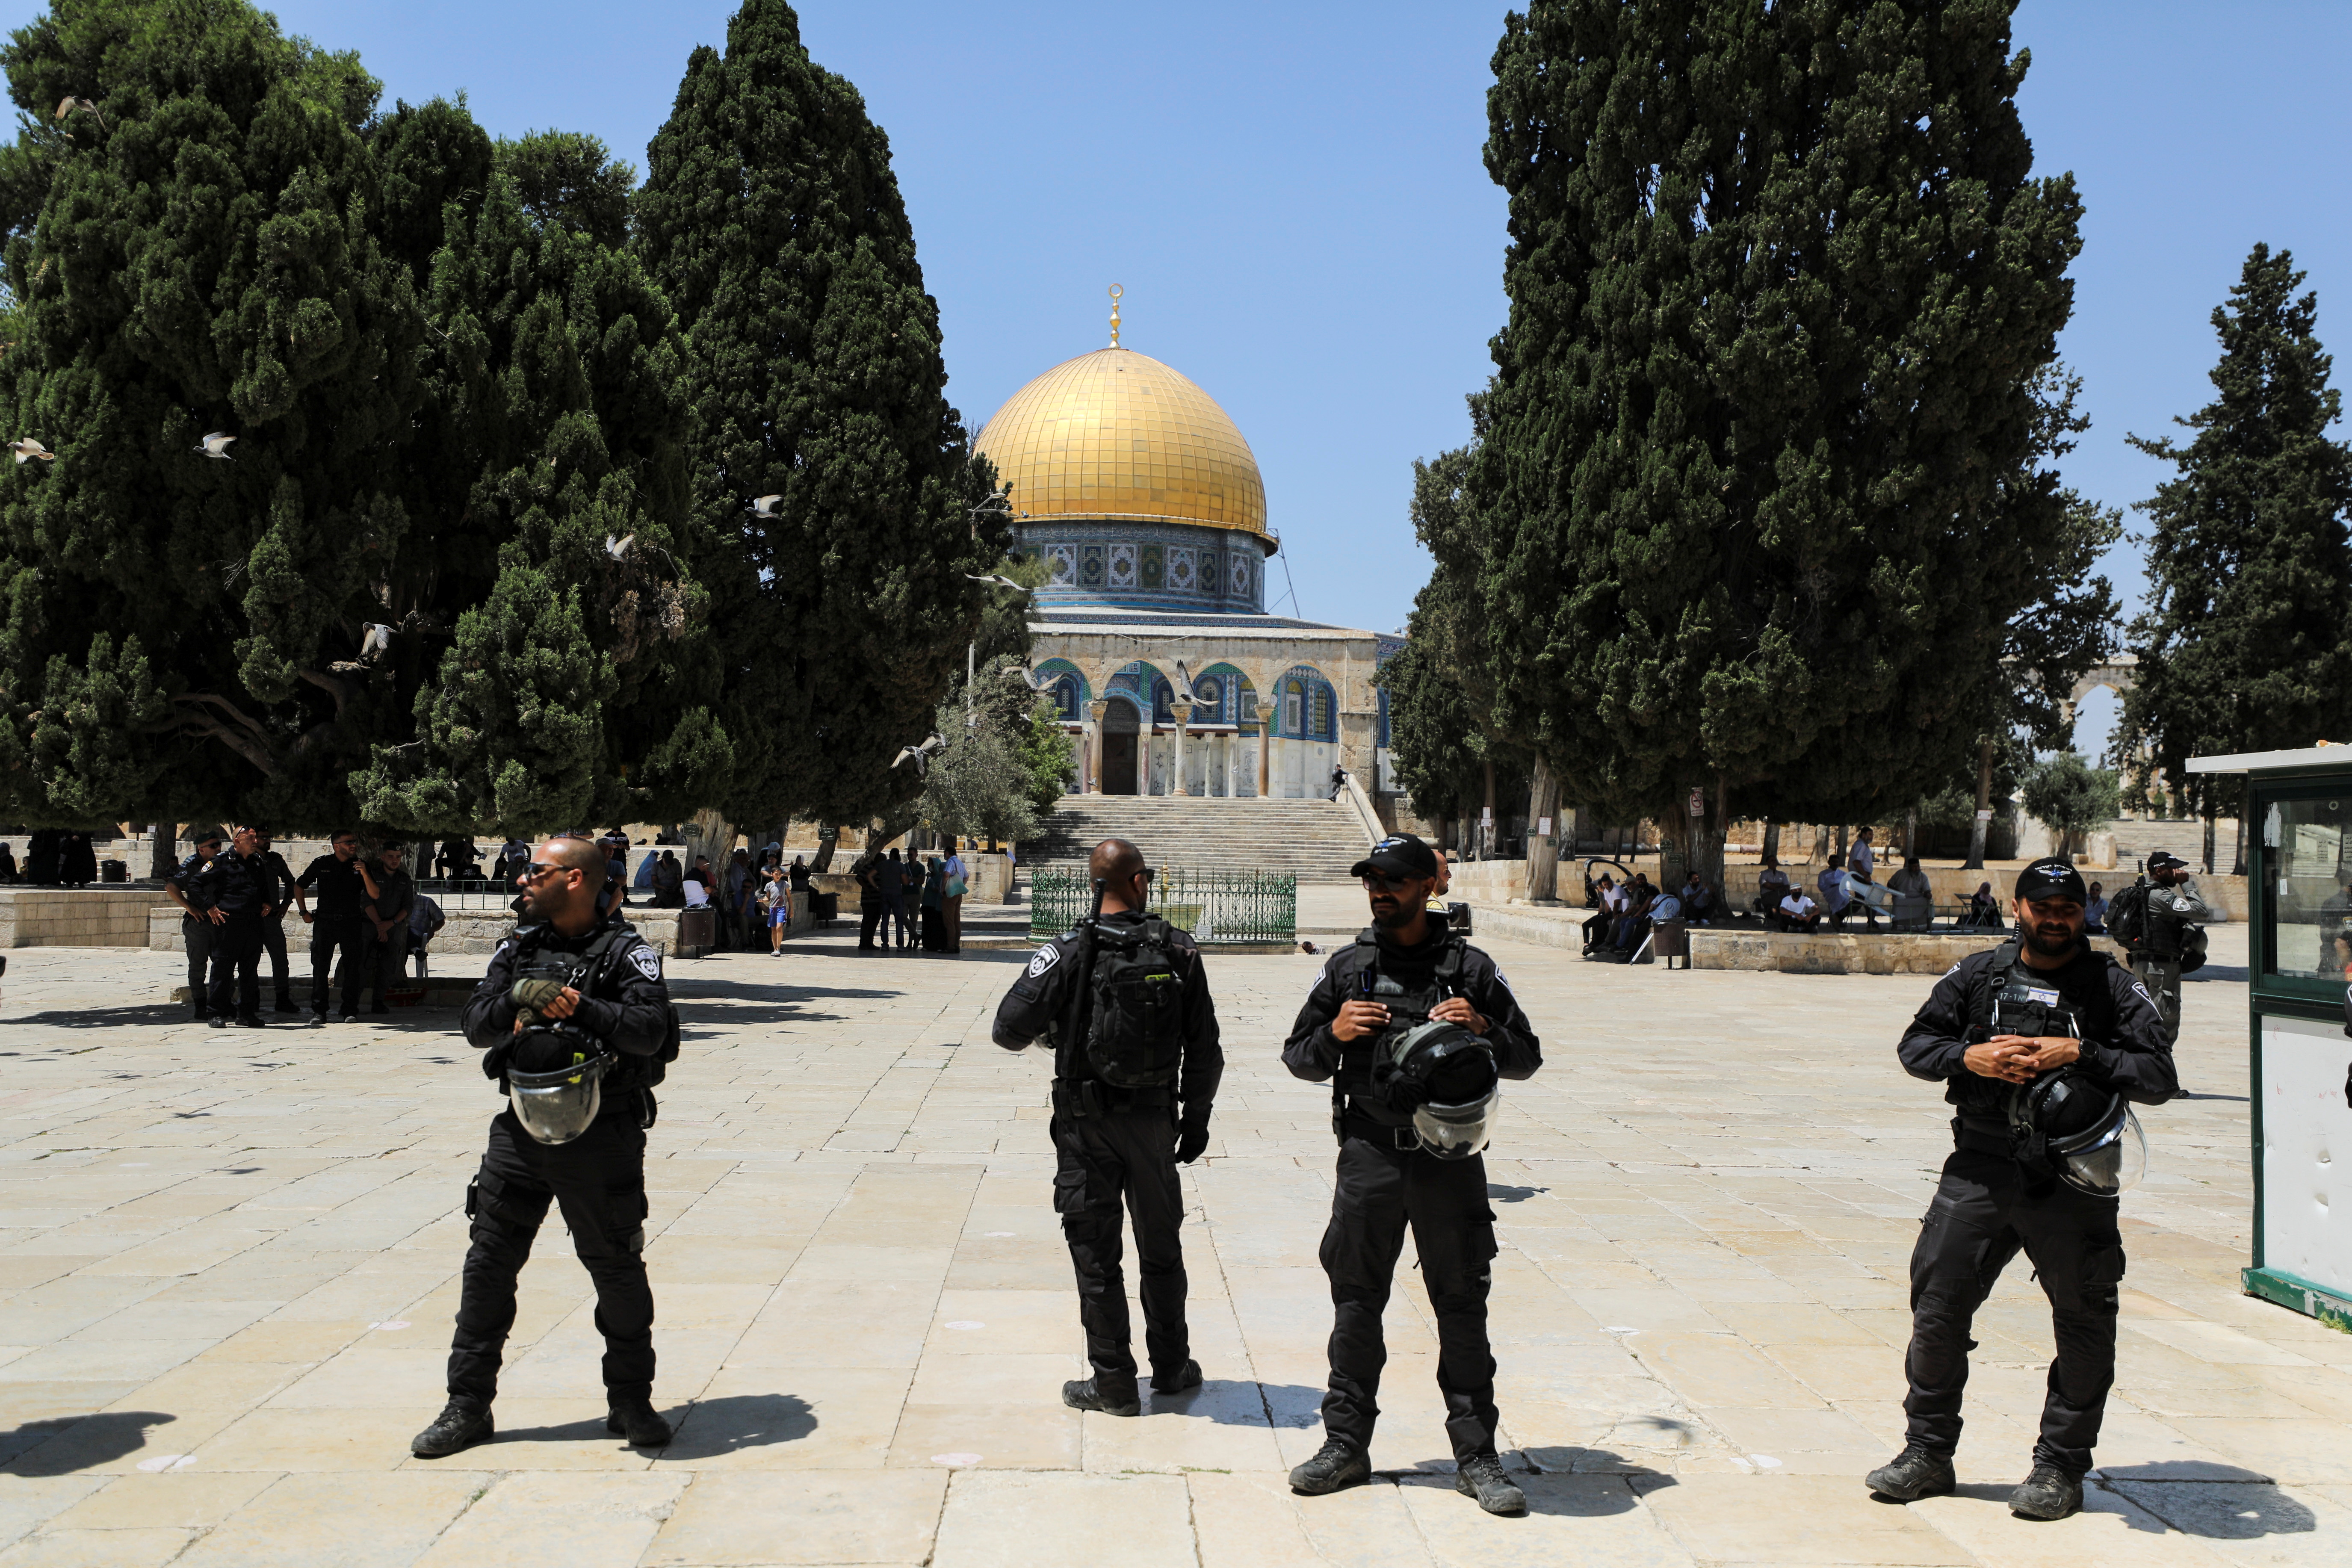 Jewish visits, opposed by Palestinians, stir tensions at Jerusalem holy site